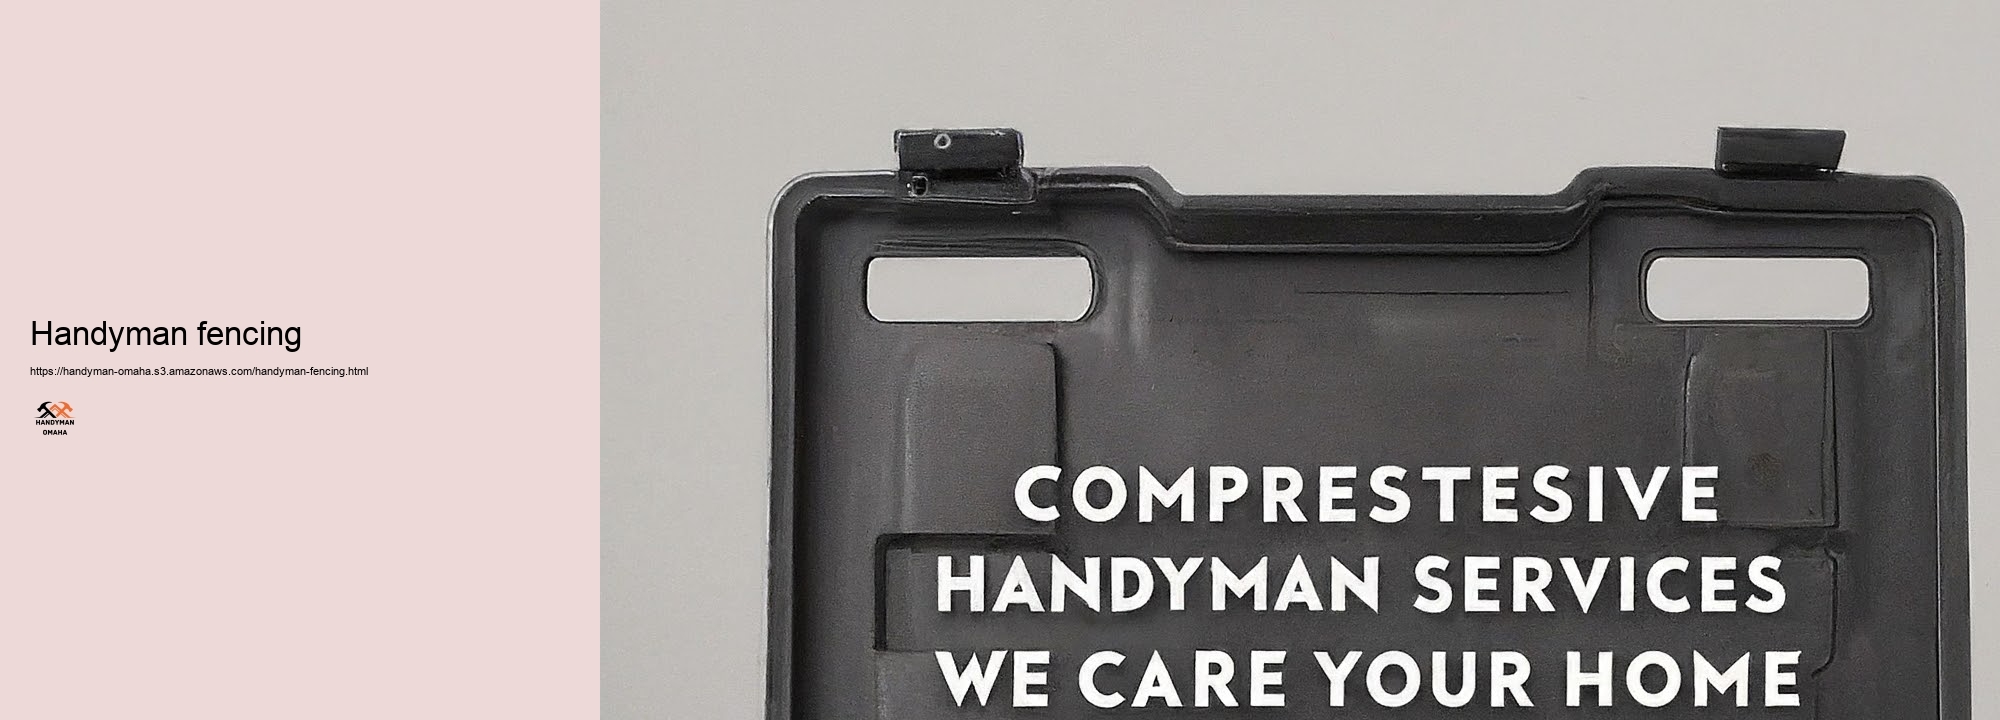 Why Choose Our Handyman Carriers in Omaha?